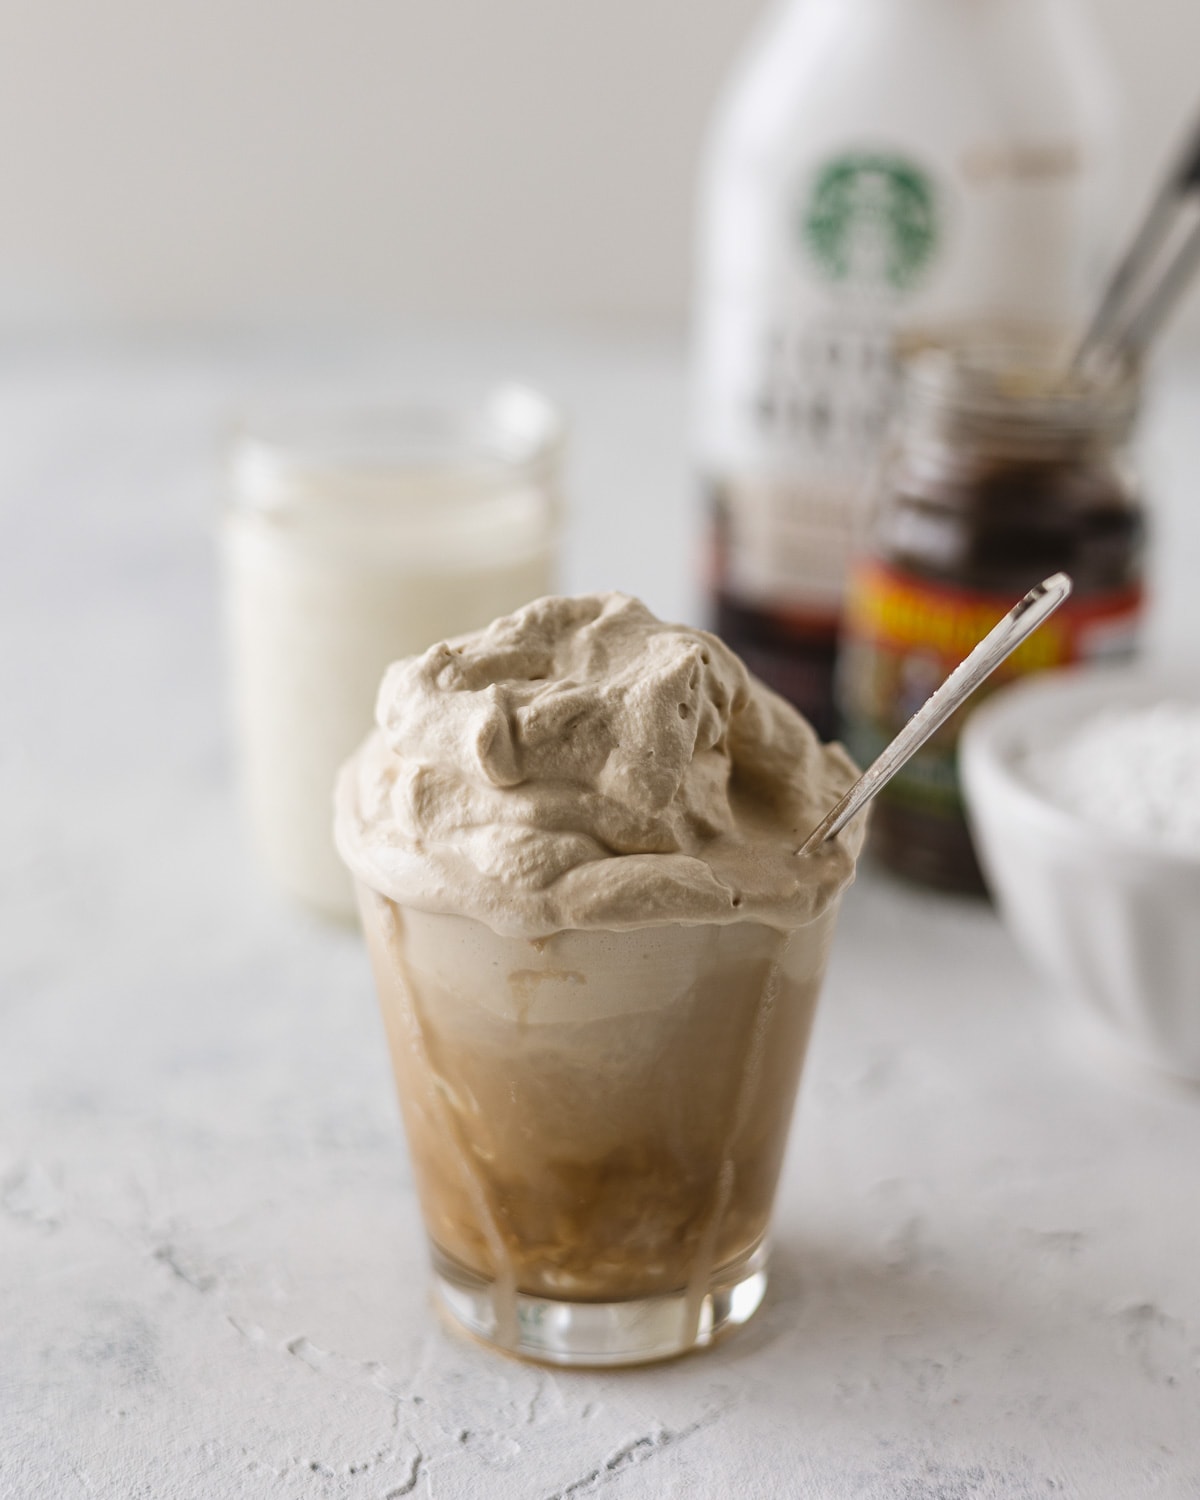 A spoon in a small glass of coffee topped with a scoop of coffee-flavored whipped cream.